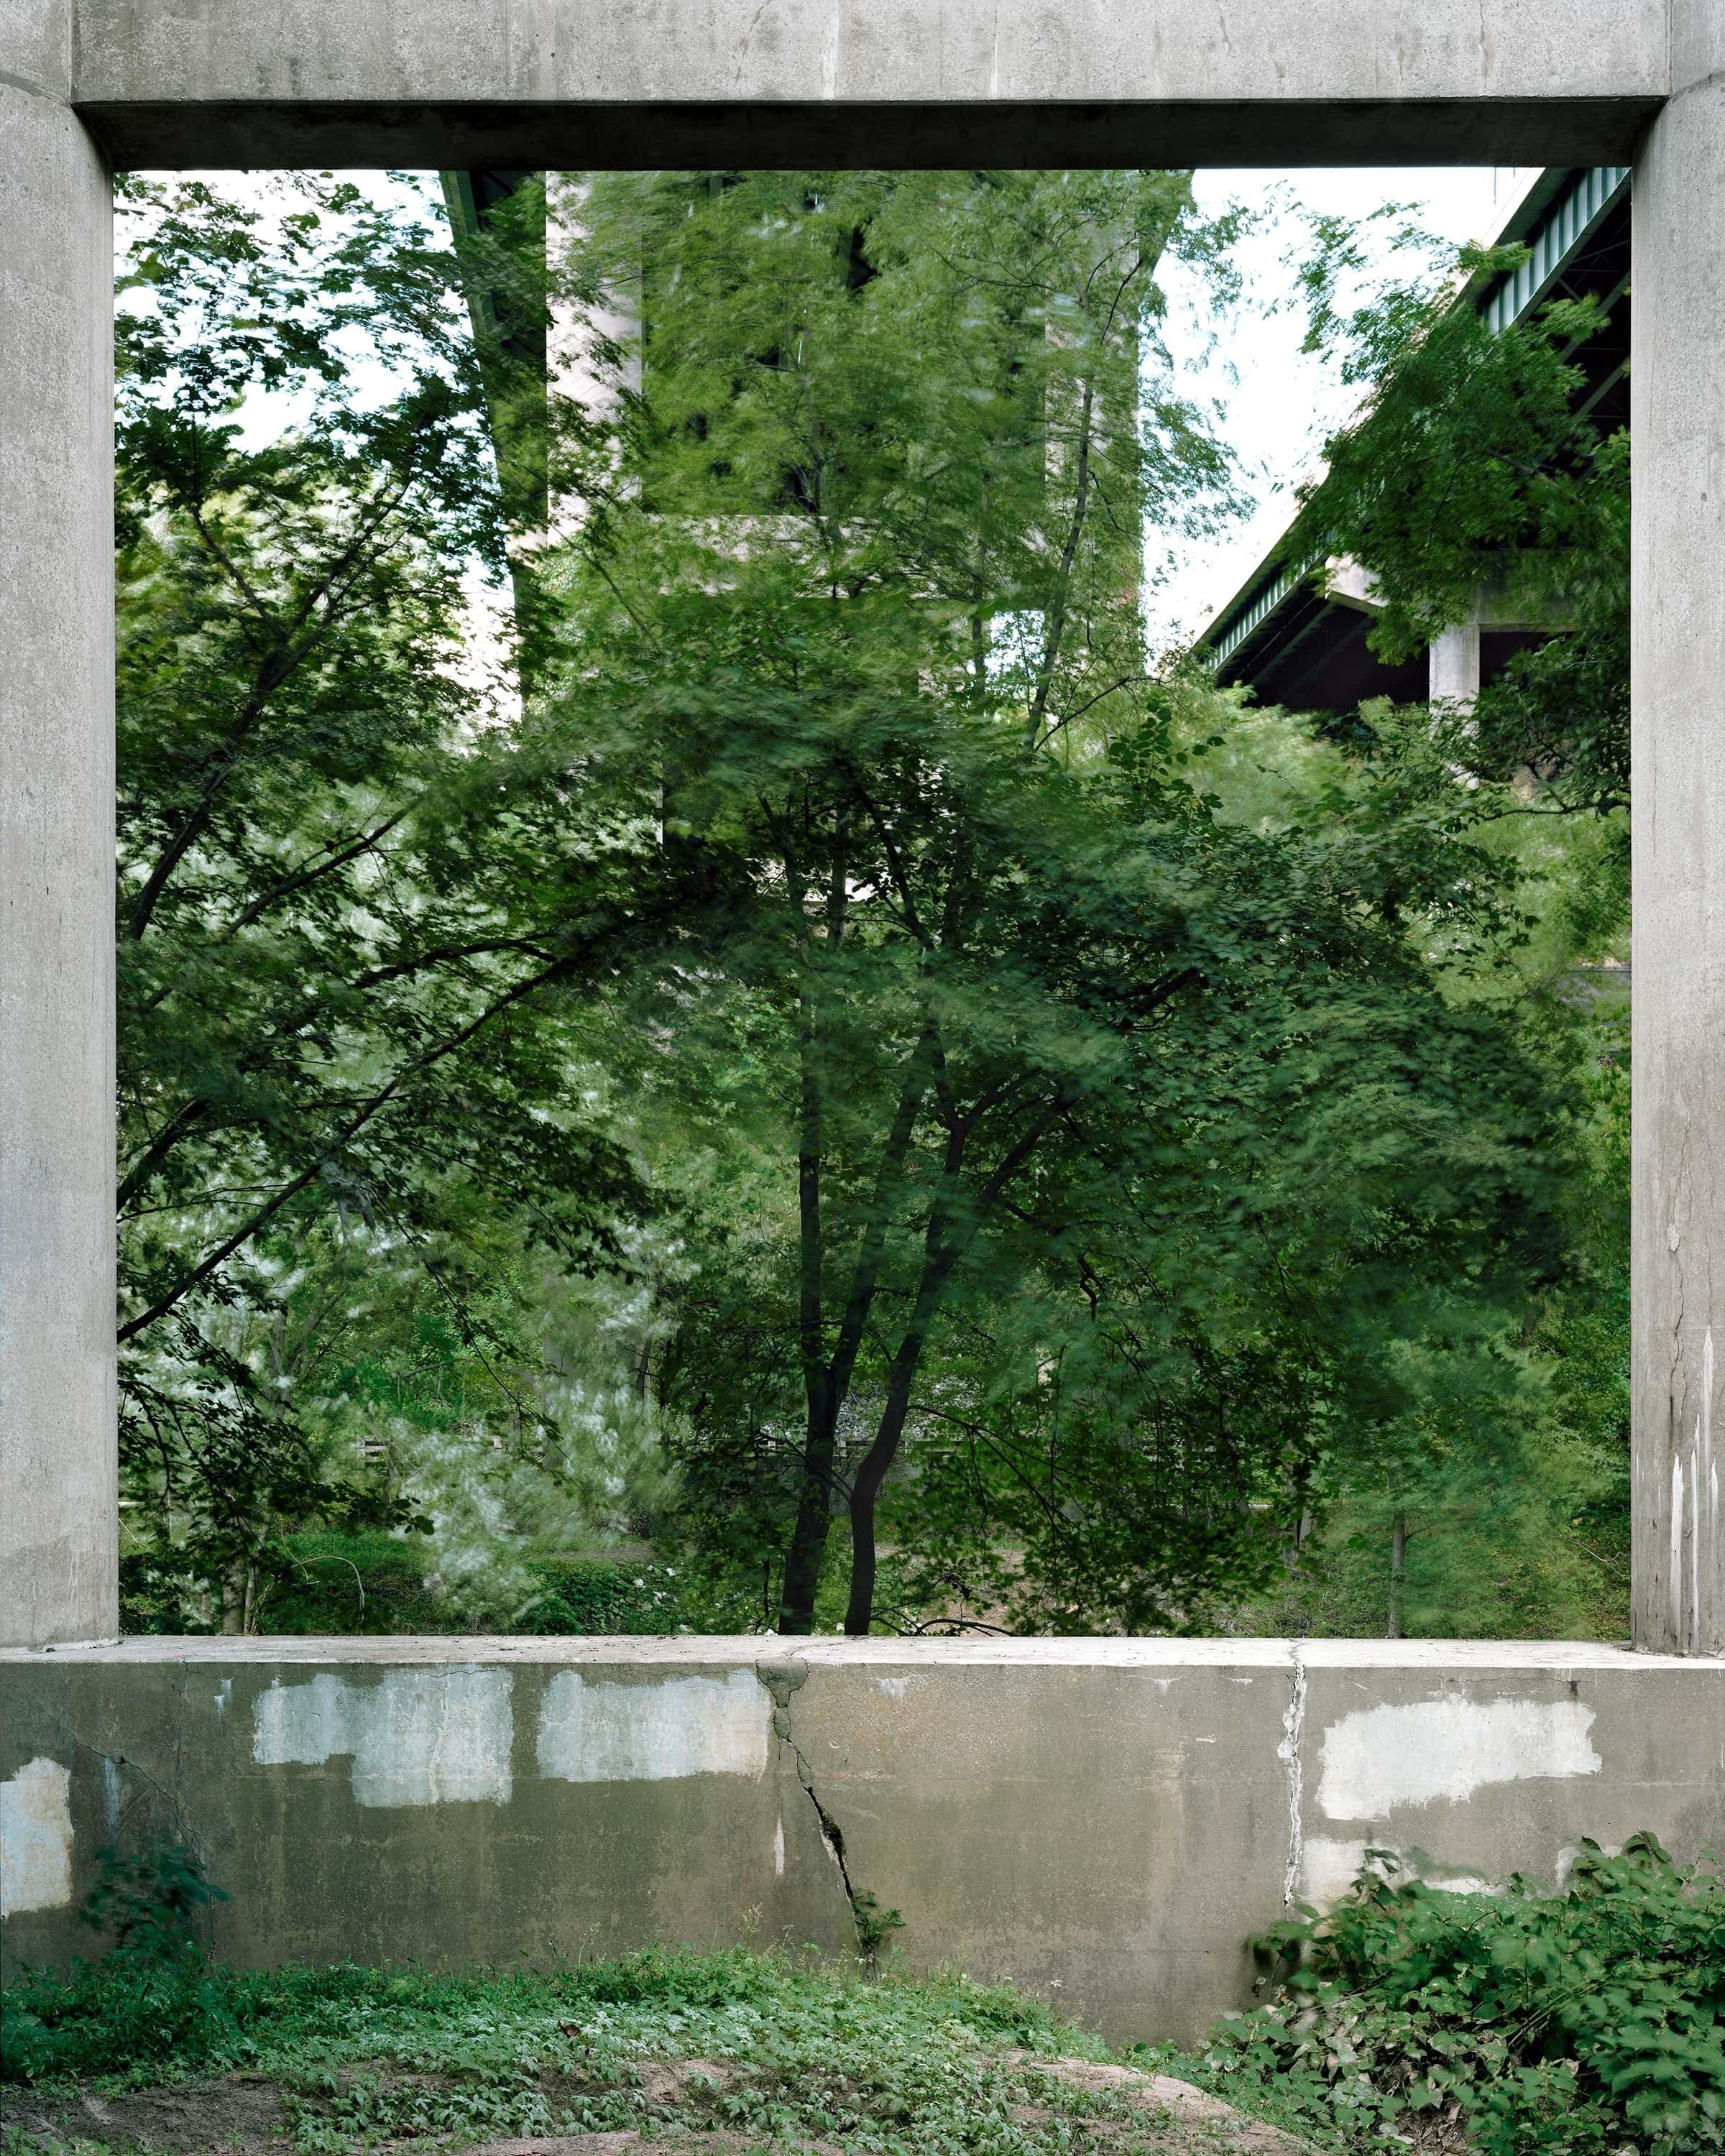 Underneath a bridge, trees are blown in the wind, framed by the bridge piers.